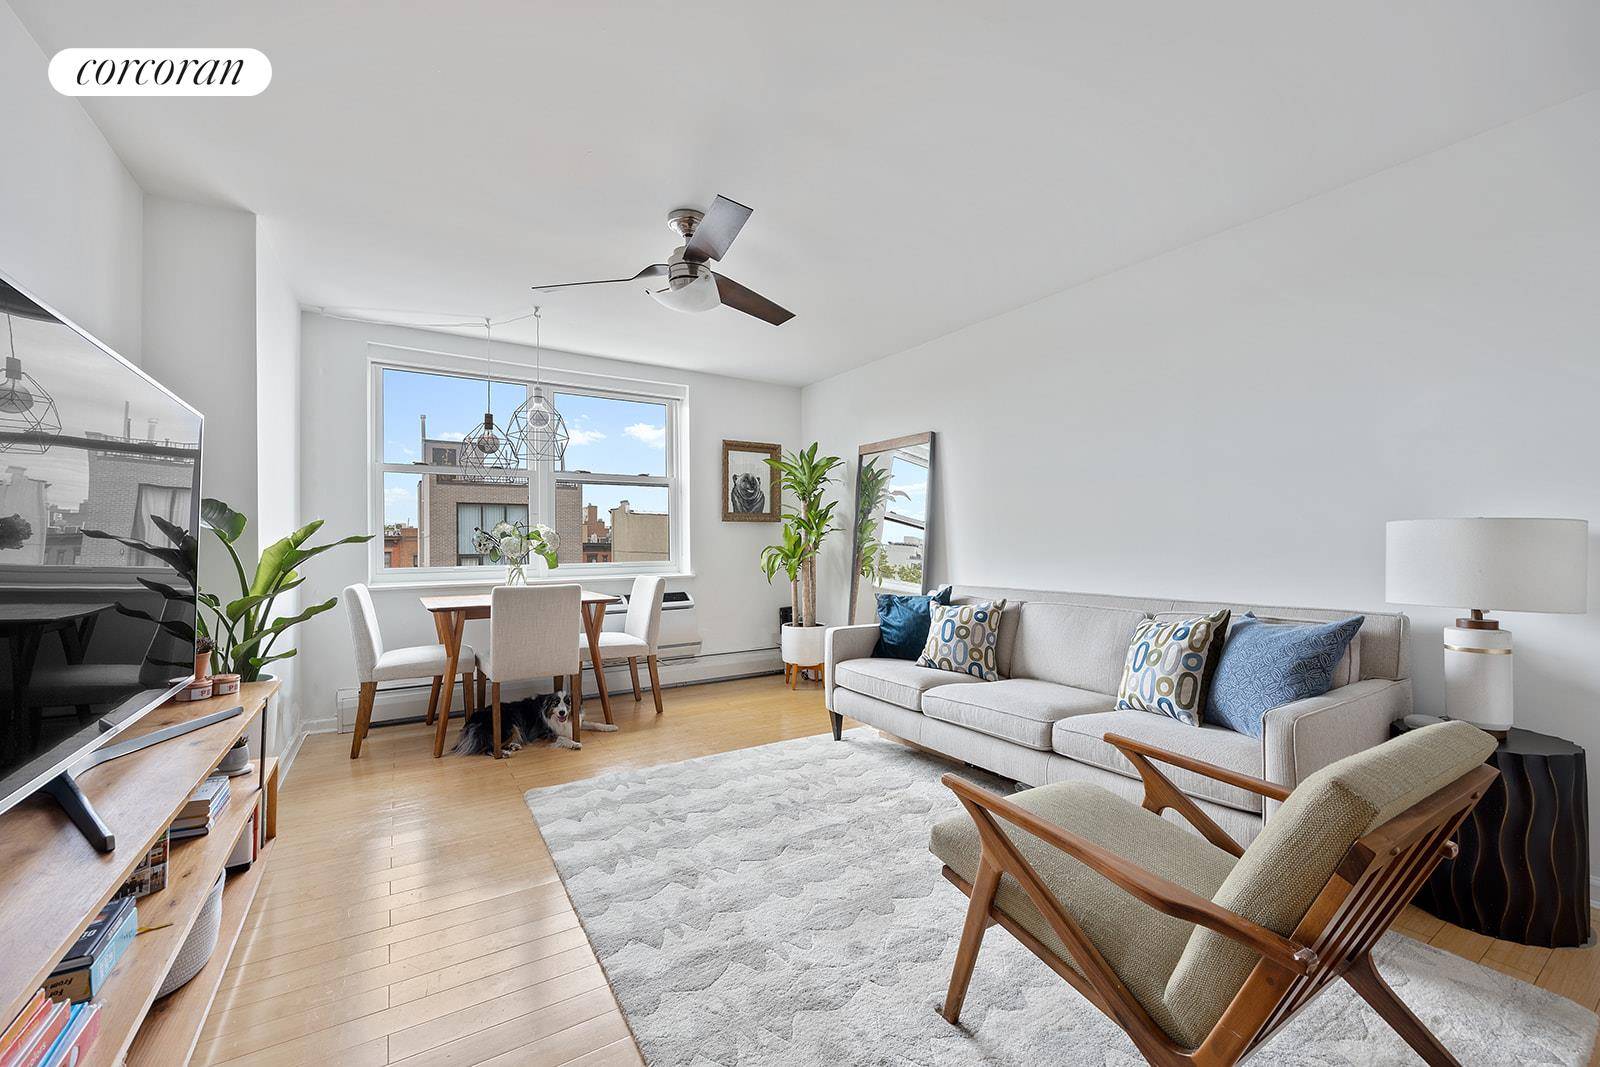 Sitting on the edge of timeless Carroll Gardens, historic Cobble Hill and quaint Columbia Street Waterfront District, a spacious two bedroom, one bathroom condominium awaits at 156 Sackett St.